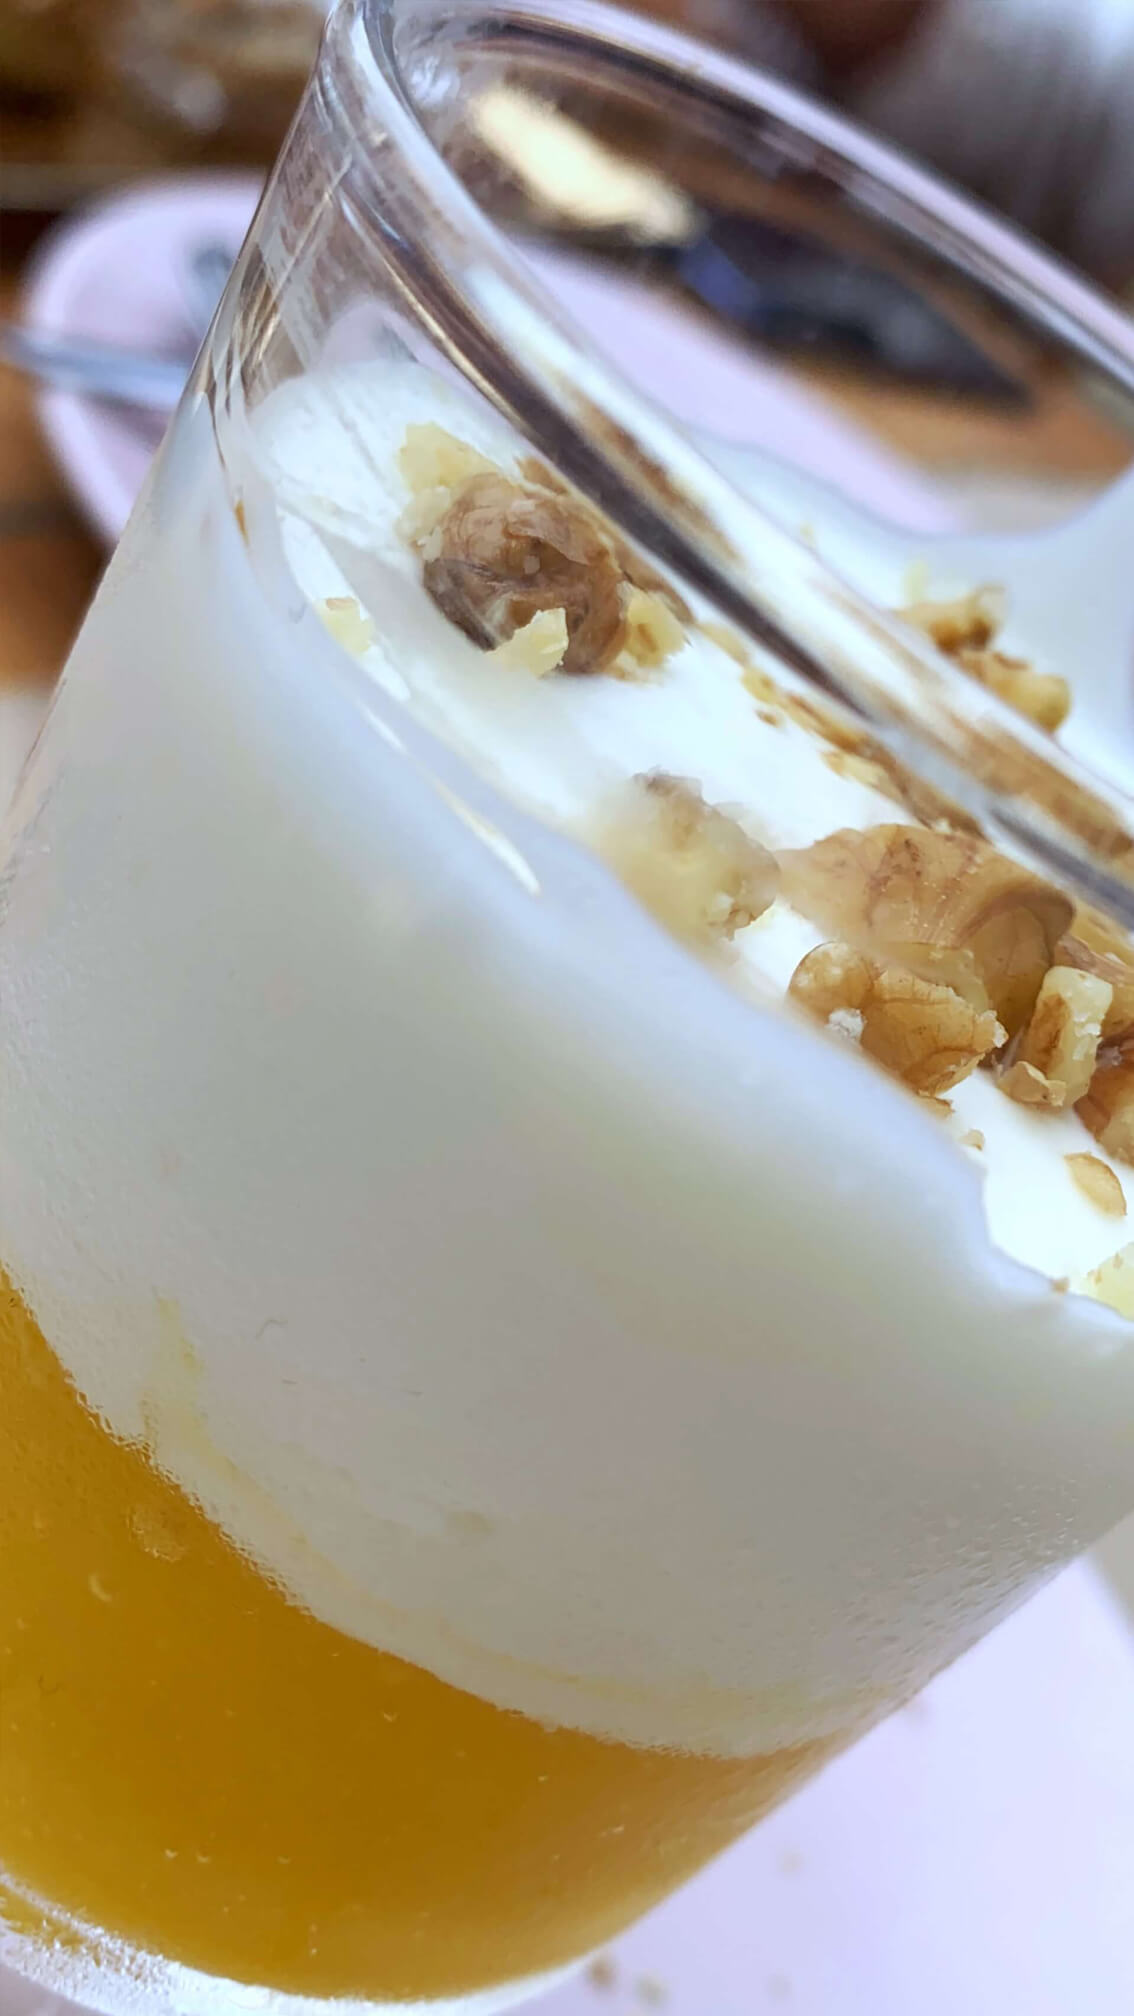 Mango mousse and nuts